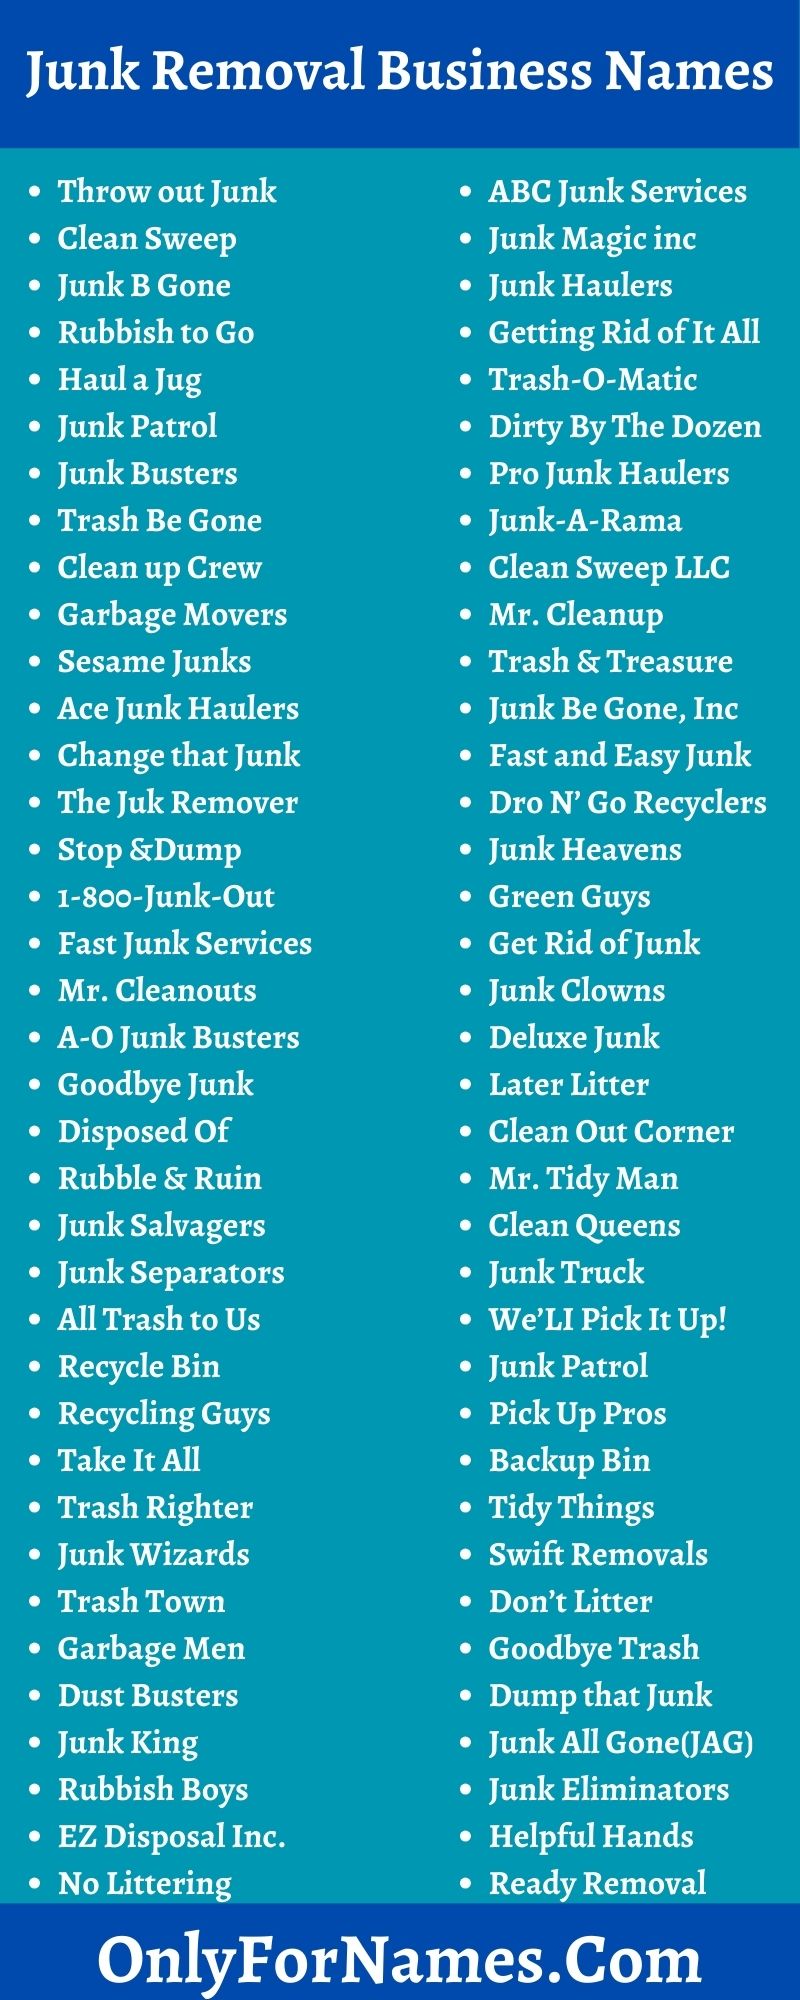 Junk Removal Business Names